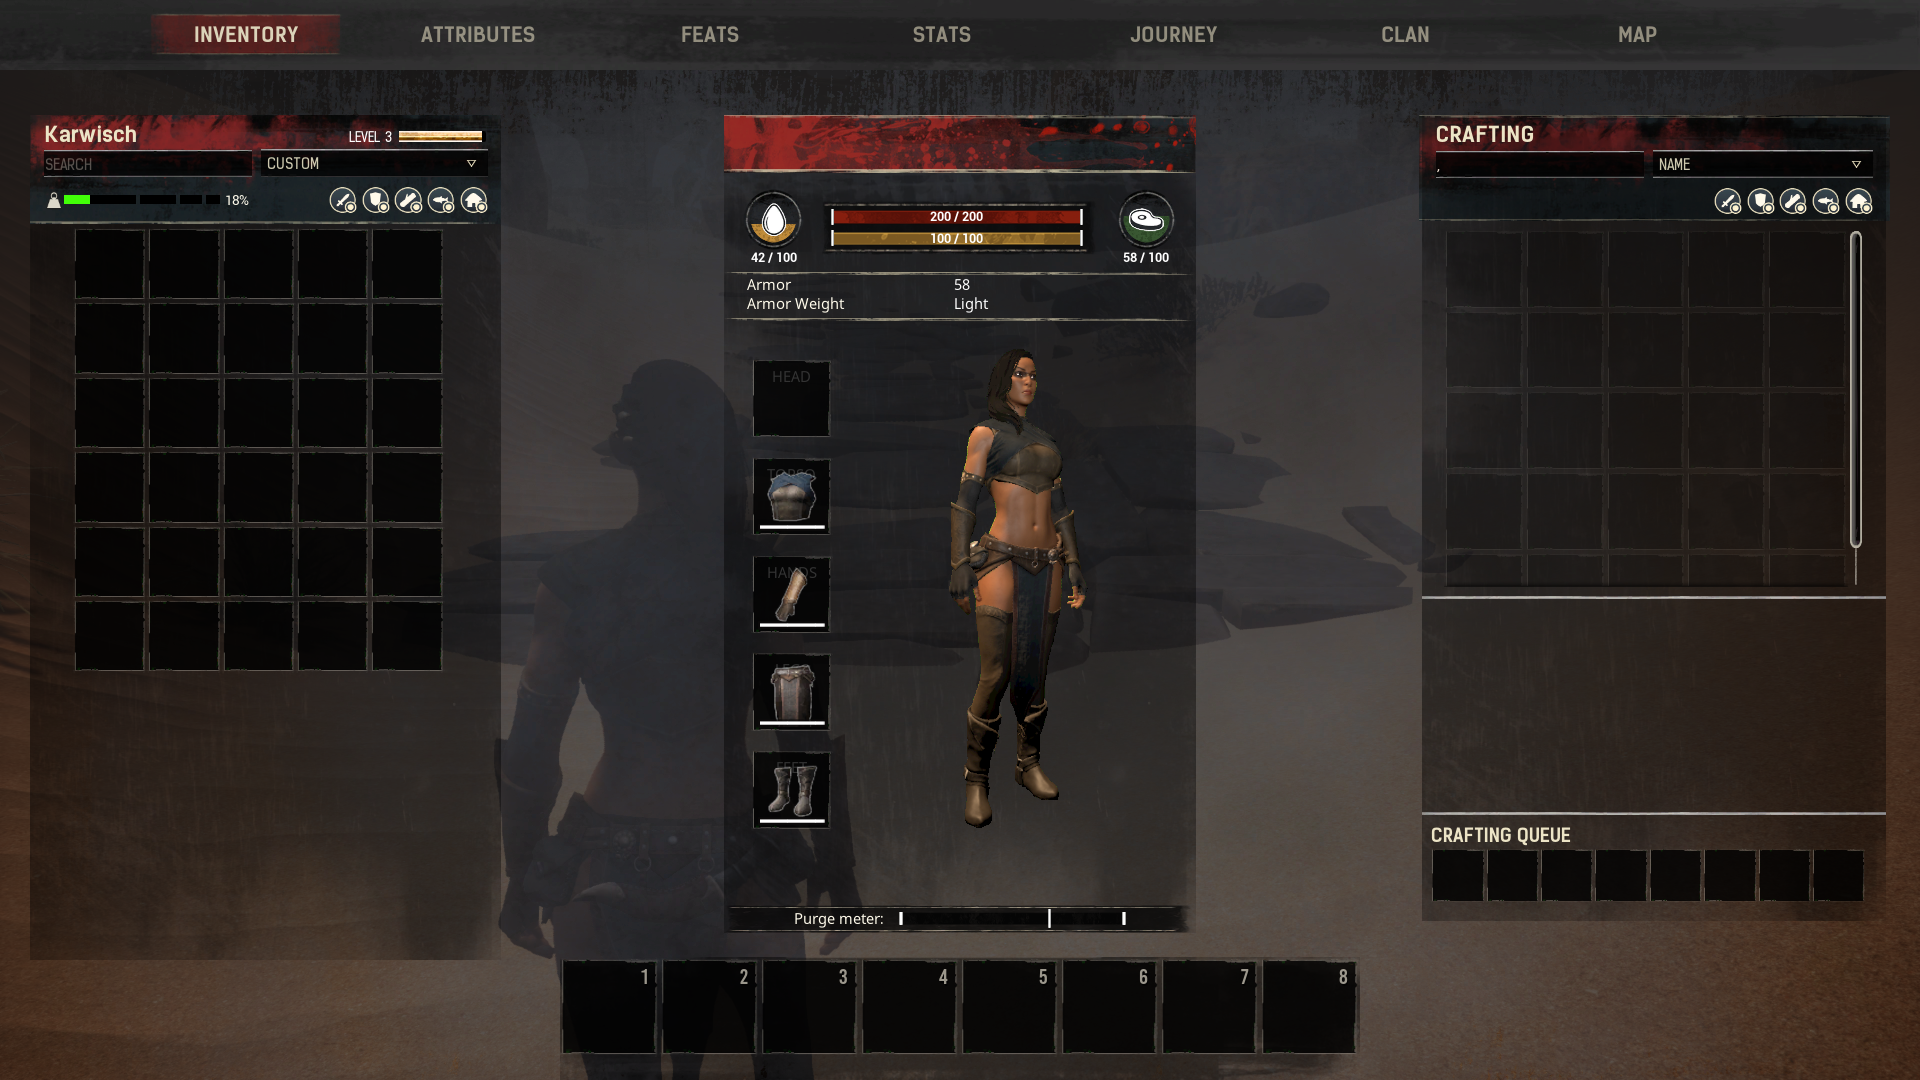 conan exiles how to join clan